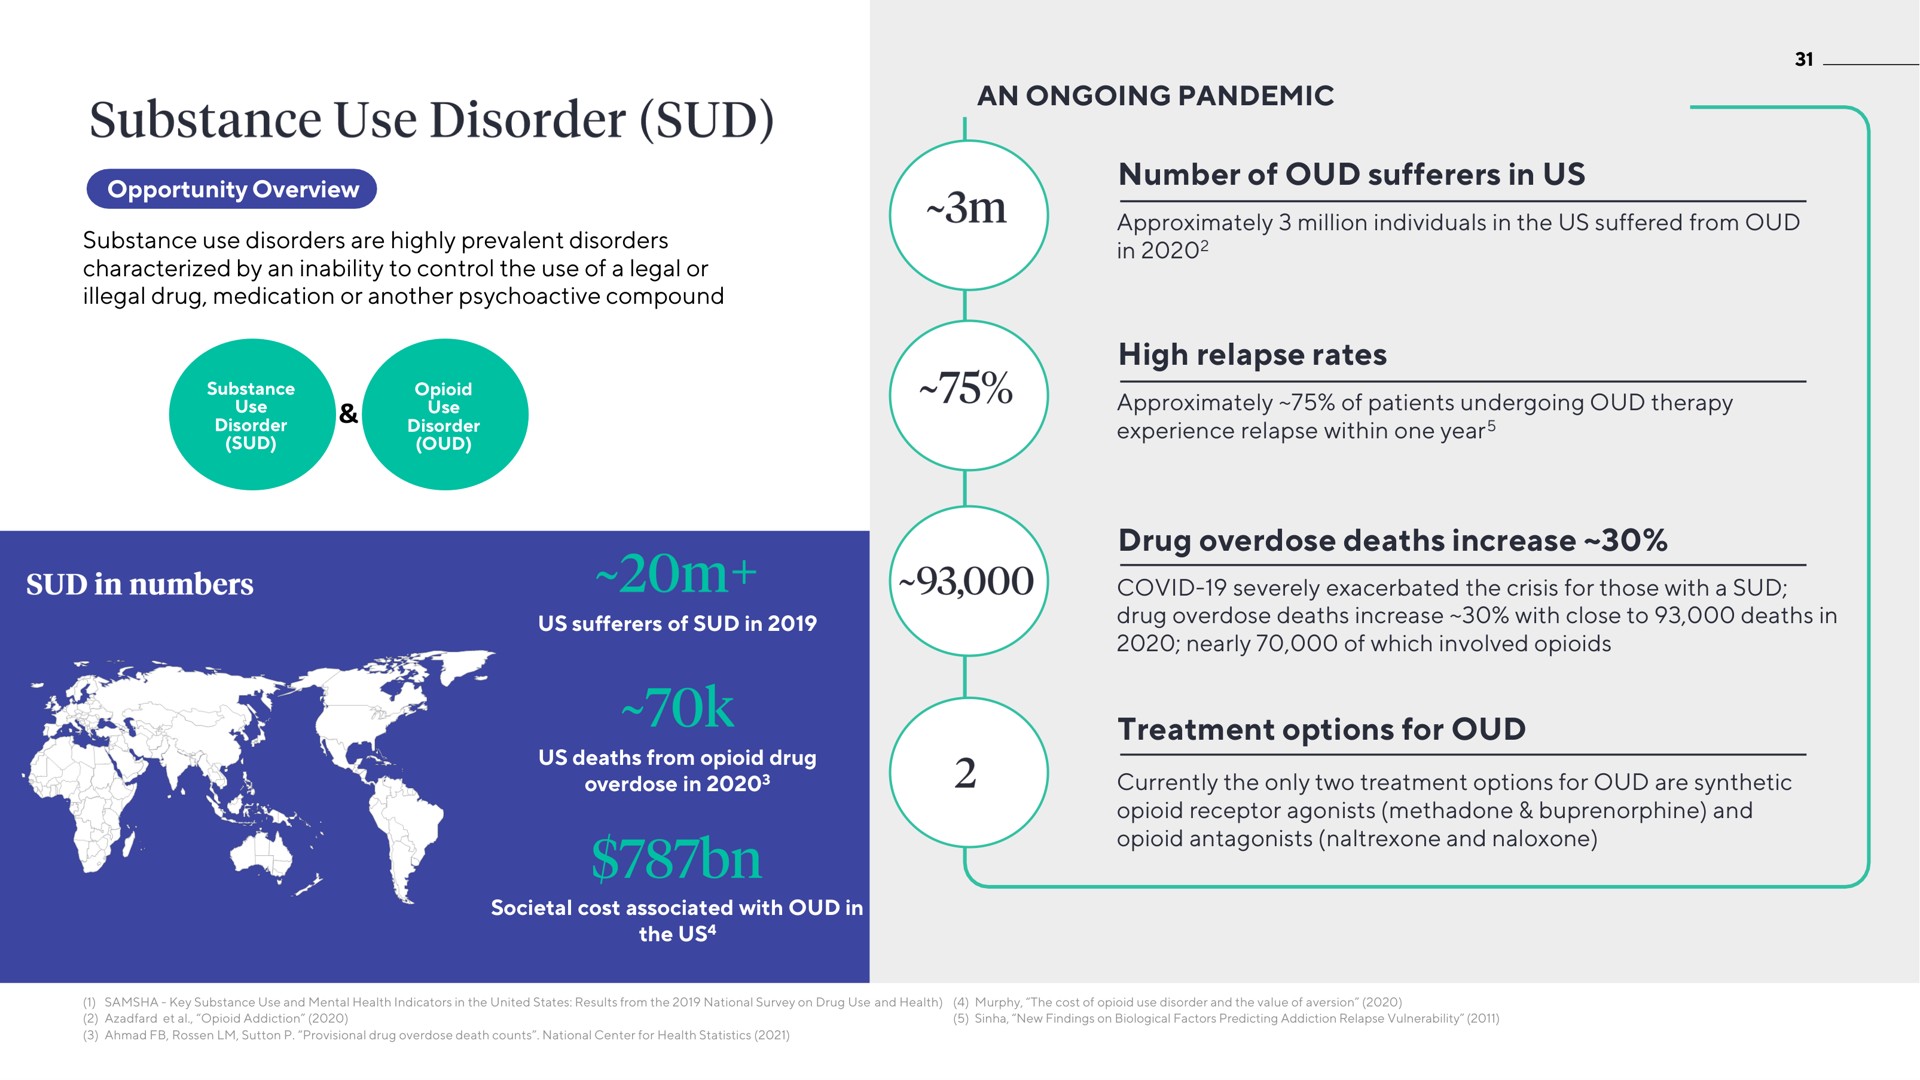 an ongoing pandemic number of sufferers in us high relapse rates drug overdose deaths increase treatment options for | ATAI